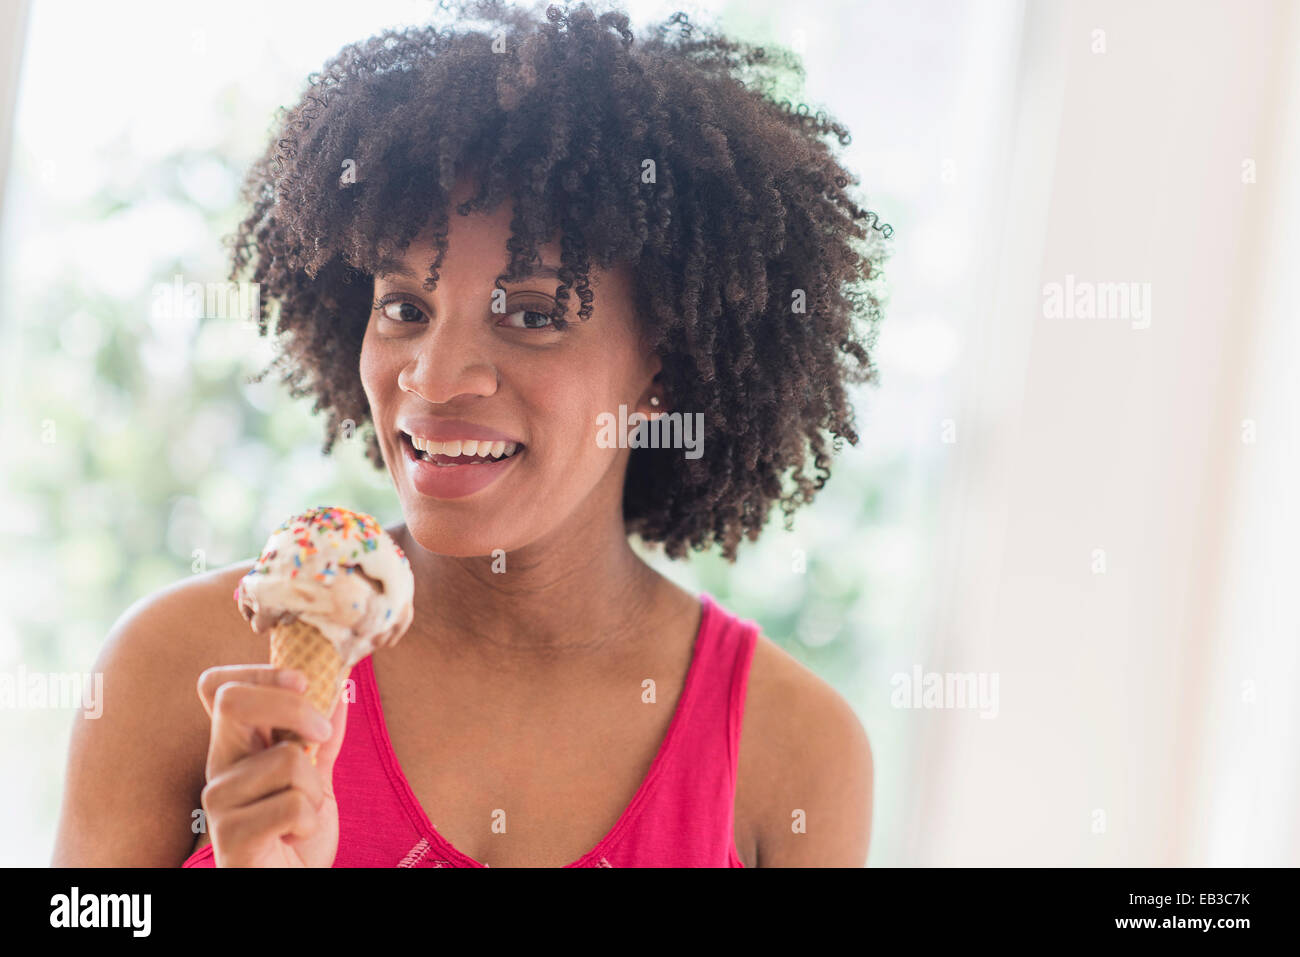 African American woman eating ice cream cone Stock Photo